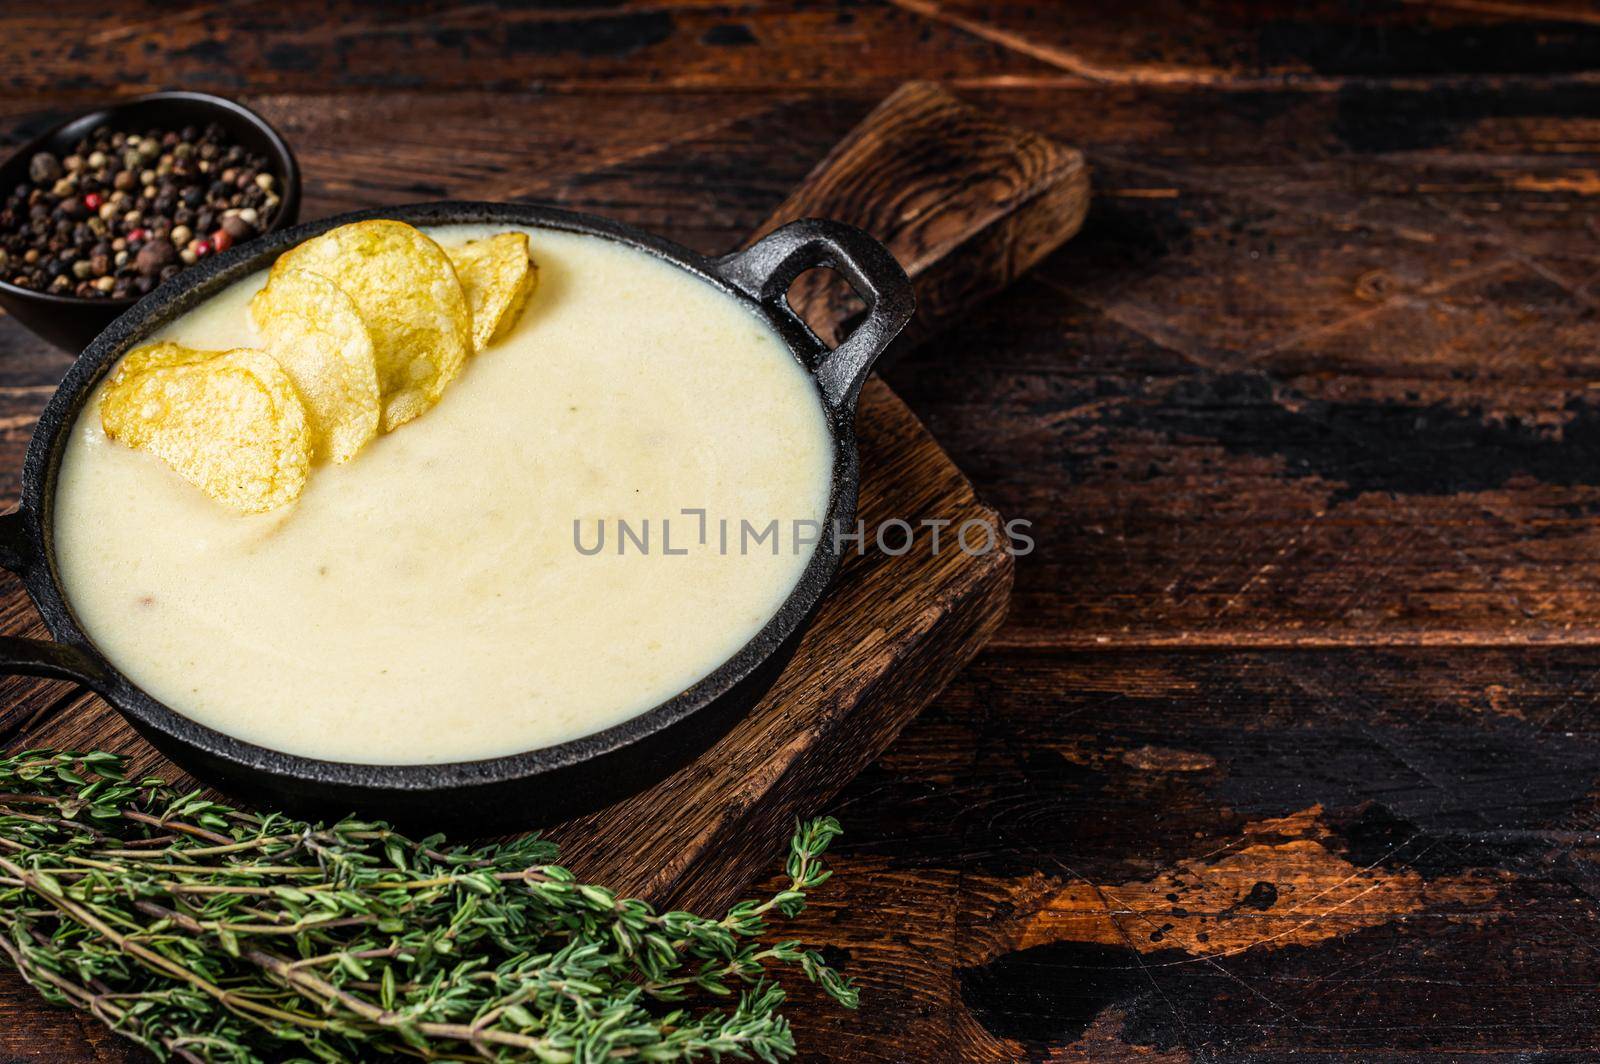 Potato cream soup with potato chips in pan on wooden board. Dark wooden background. Top view. Copy space.